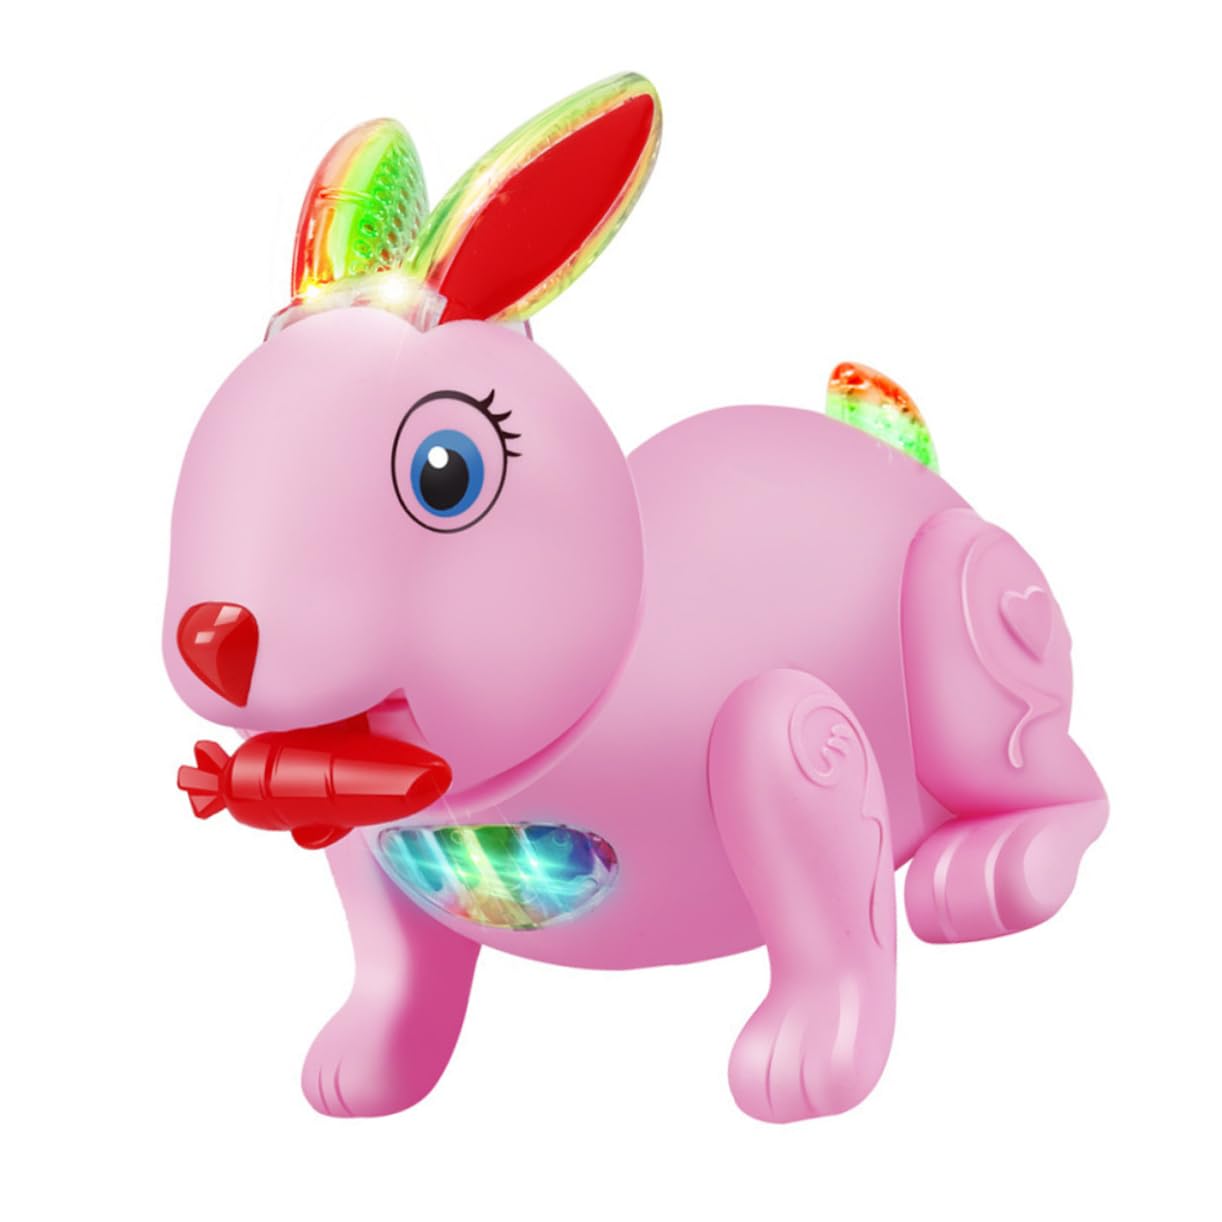 ERINGOGO 1pc Electric Bunny Musical Toy Musical Plaything Bunny Toys for Kids Kidcraft Playset Musical Rabbit Cartoon Toy Rabbit Playing Child Bouncy Bunny Radish Electronic Component